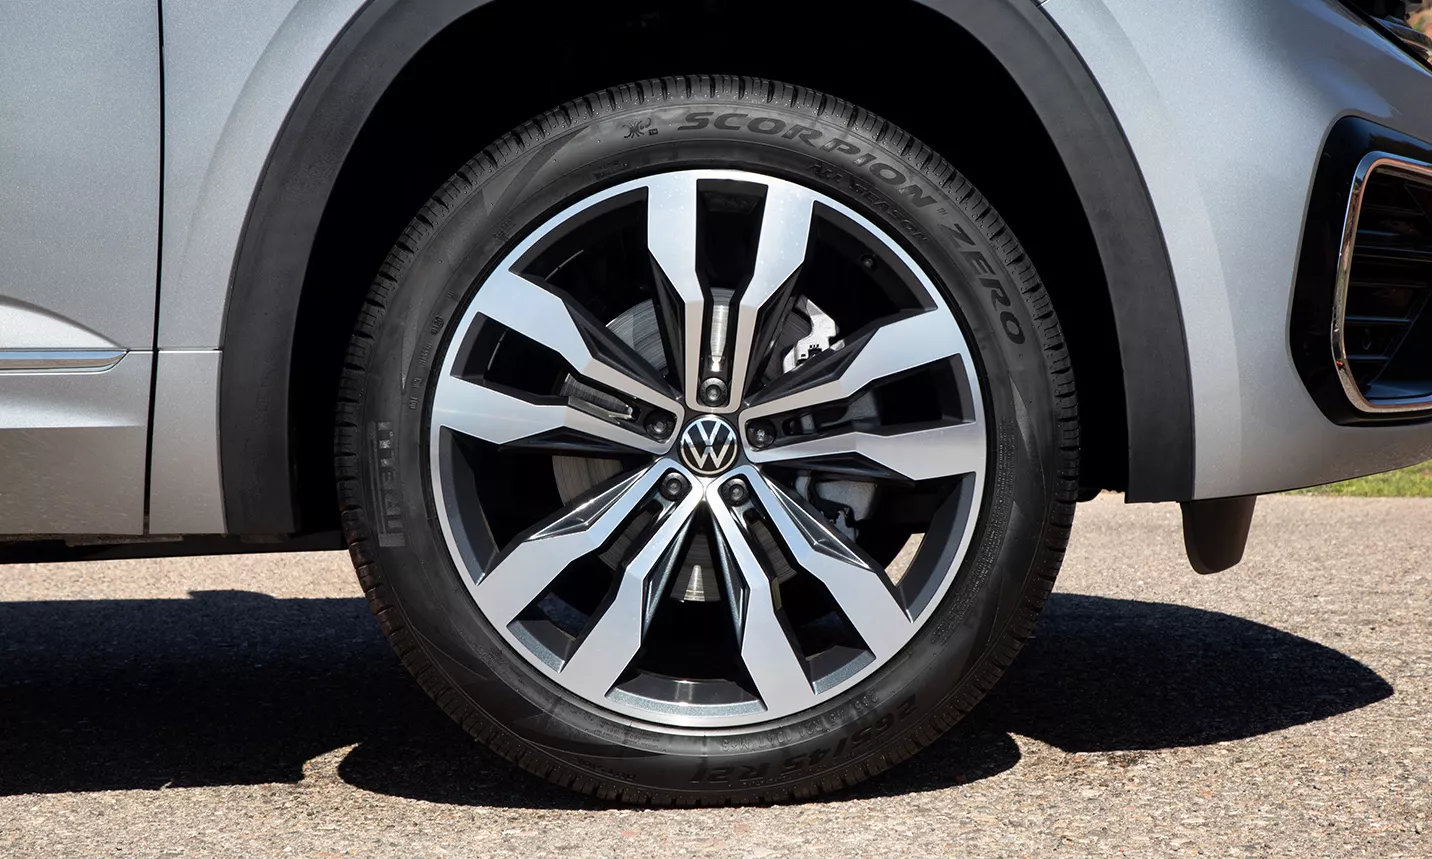 A closeup of the available 21 inch alloy wheel on the front driver’s side.